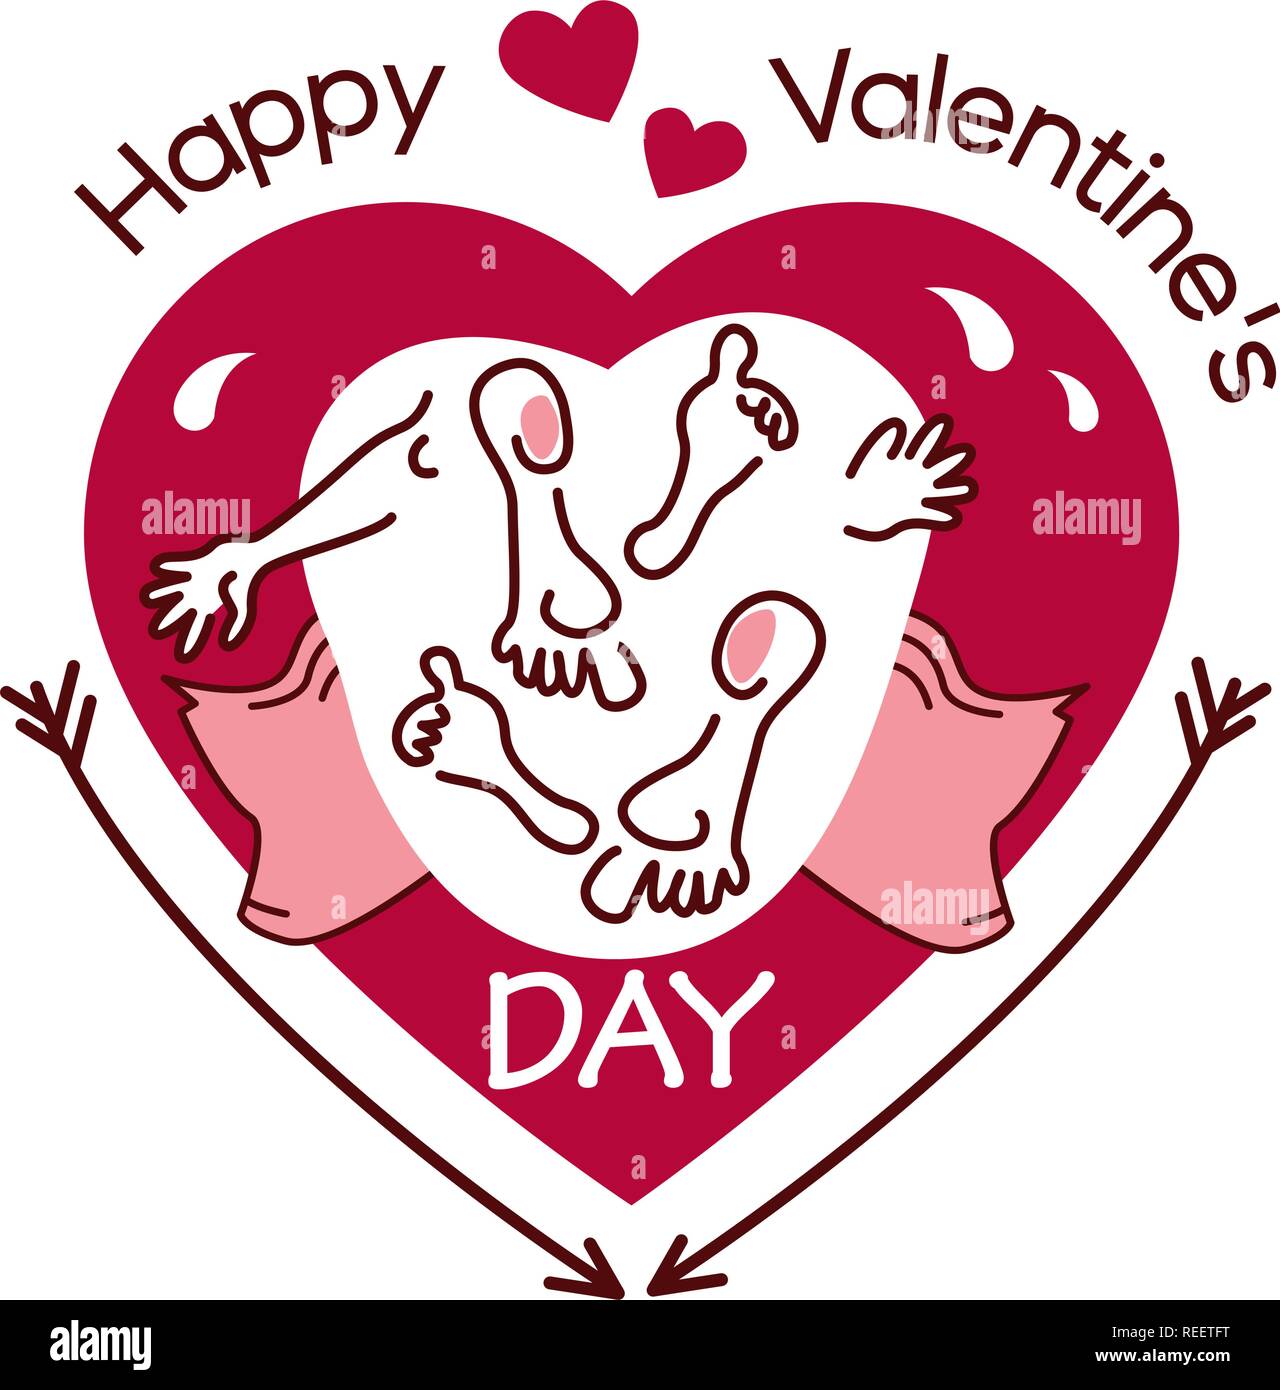 Funny, humorous Happy Valentine's Day greeting card. Typographic text with red heart, arrows, love, sex, people.Vector illustration. Stock Vector